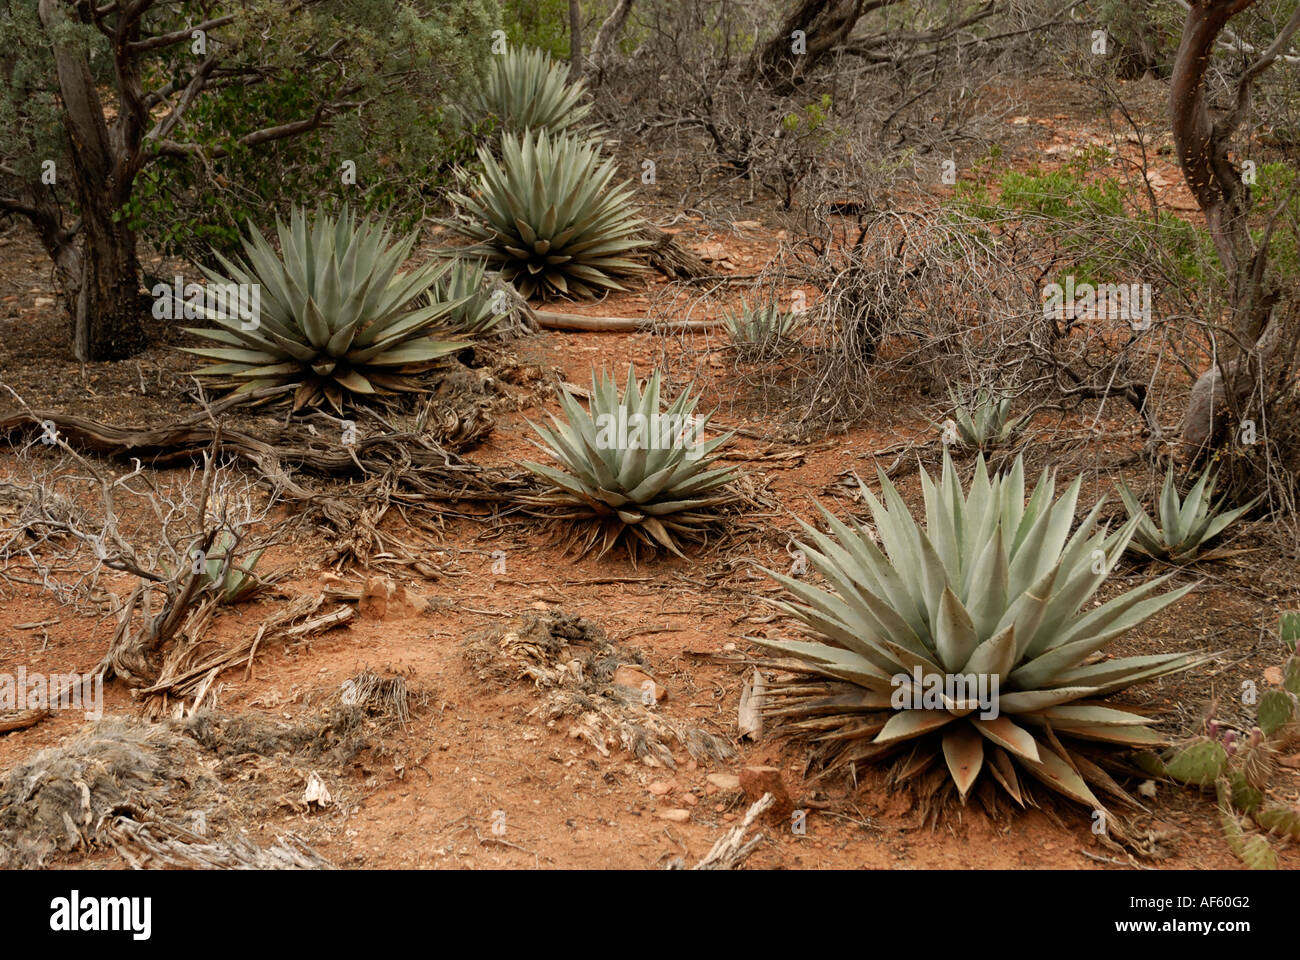 Agave, Century Plants, Agave parryi, Coconino National Forest, Arizona Stock Photo